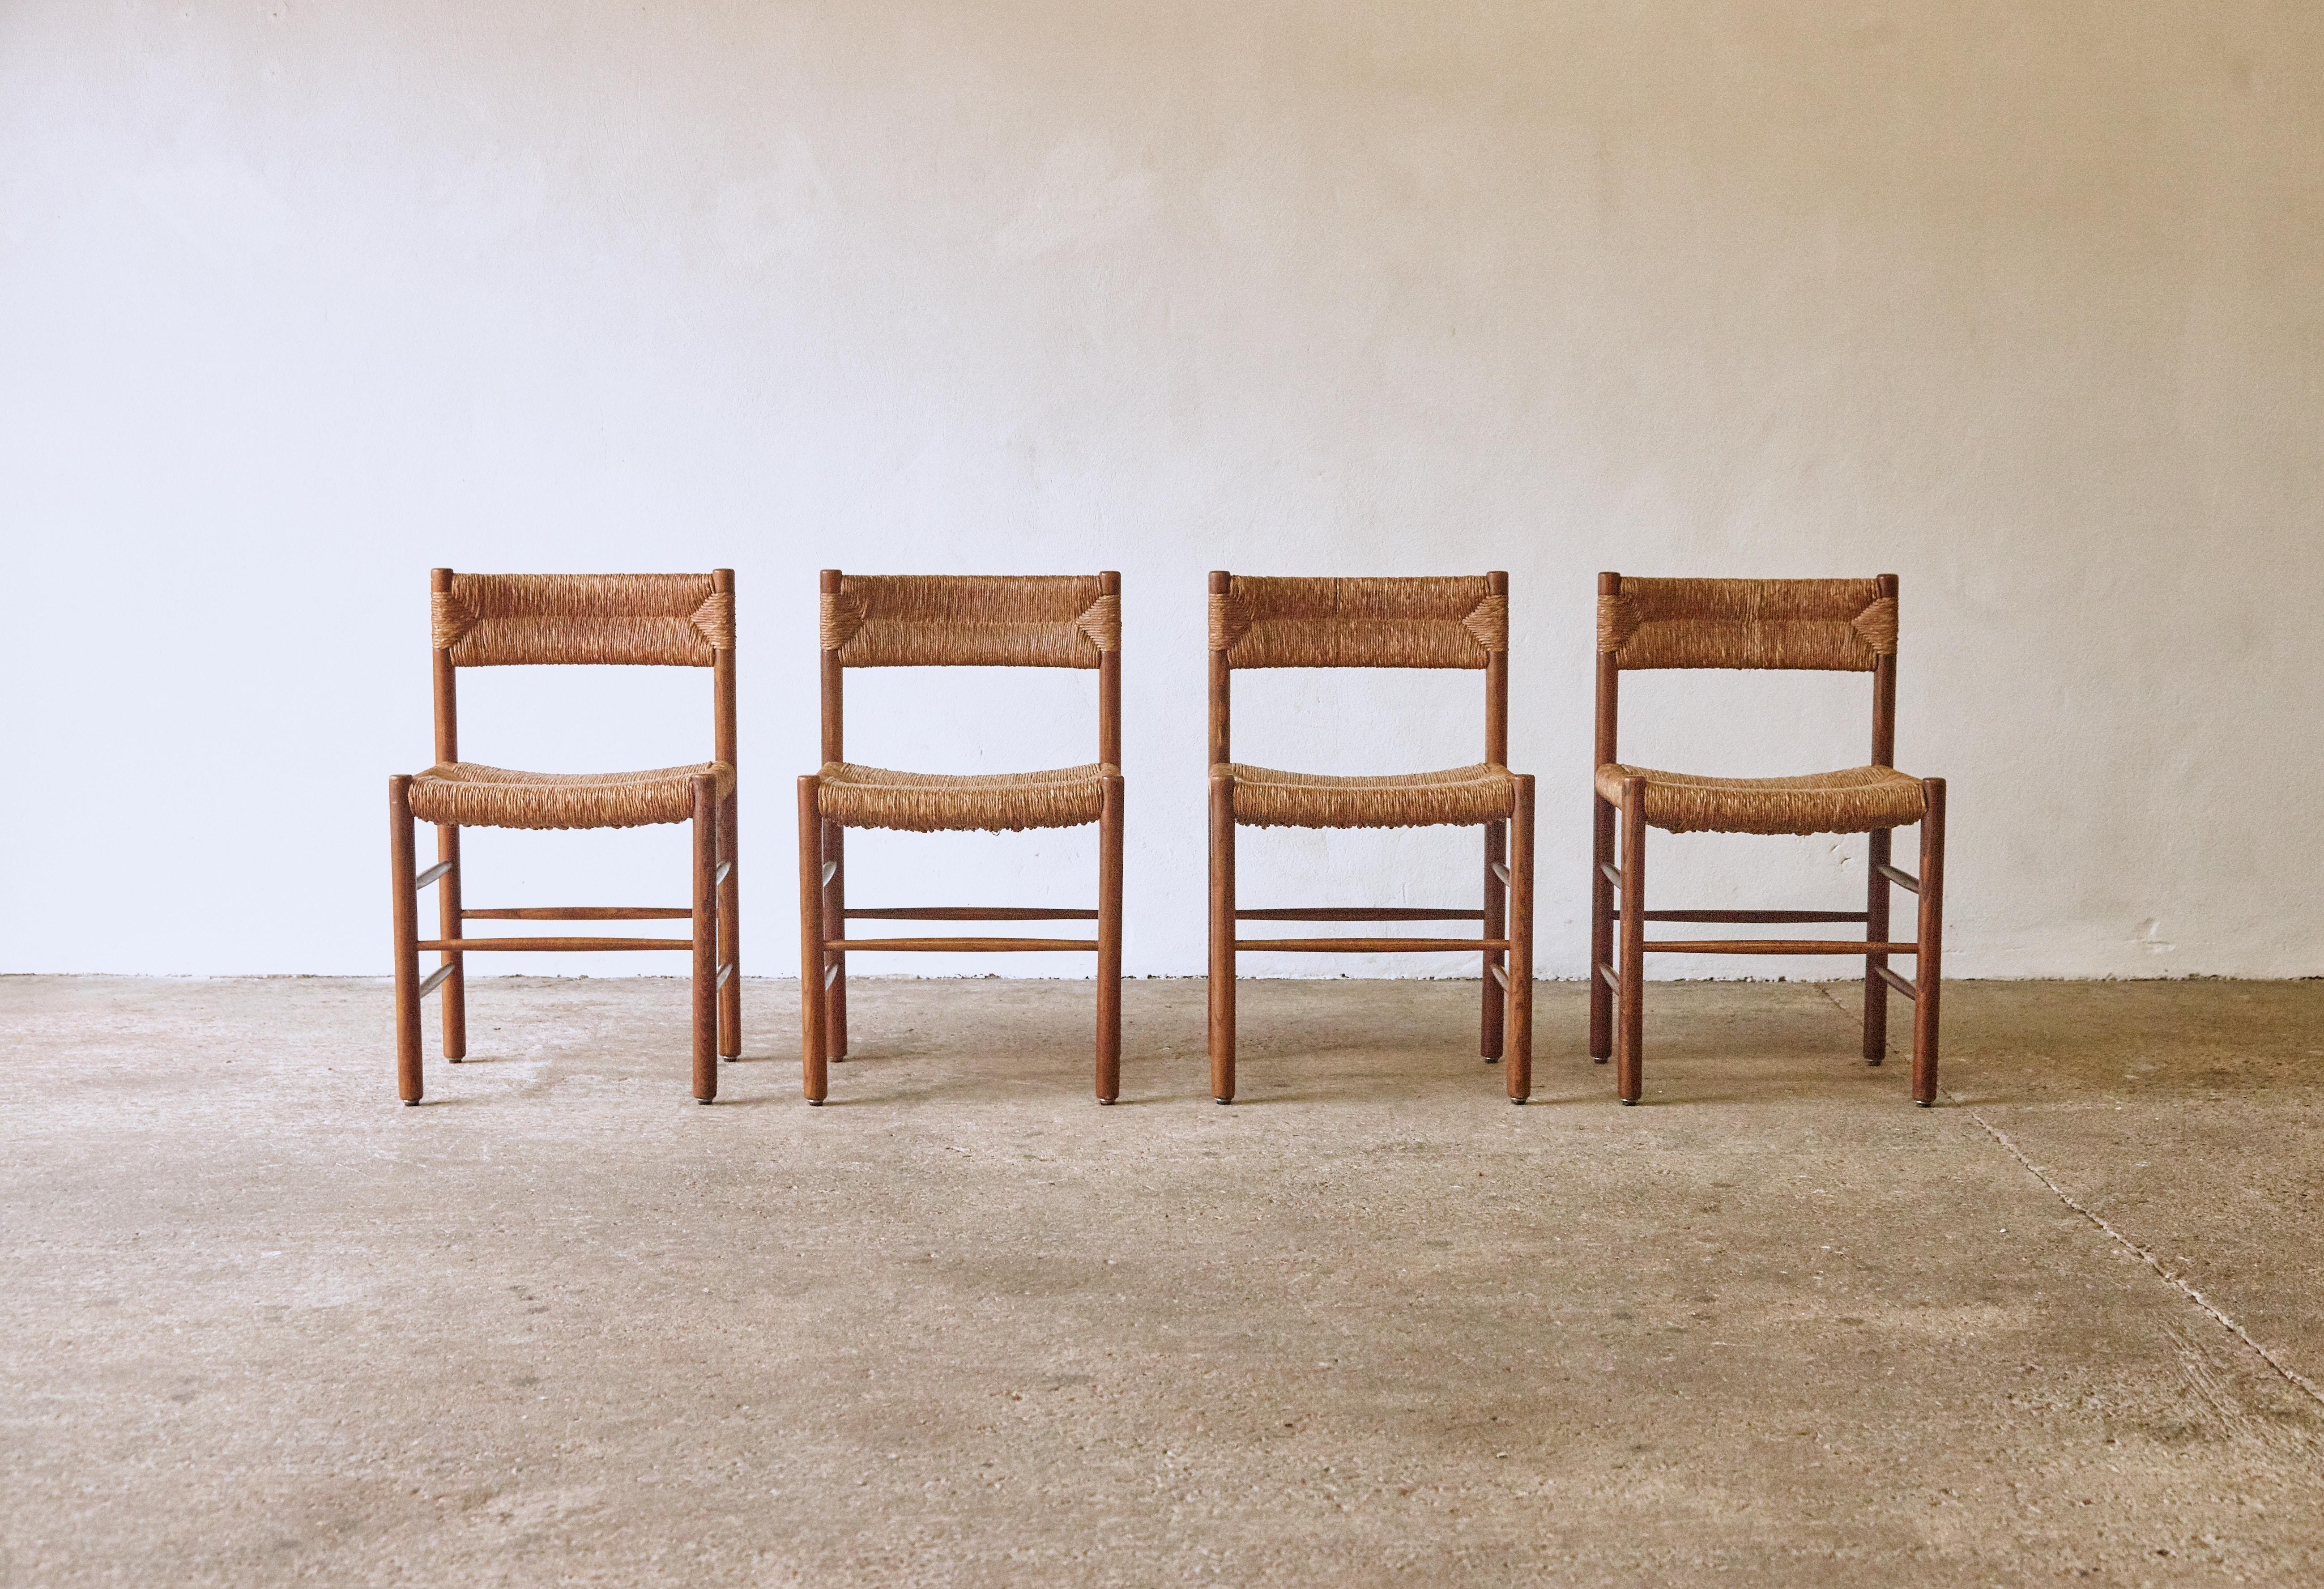 A set of four original Robert Sentou Dordogne chairs, this model often attributed to Charlotte Perriand, France, 1960s. Good structural condition, wooden frames in original condition with minor signs of use and wear relative to age. Original rush